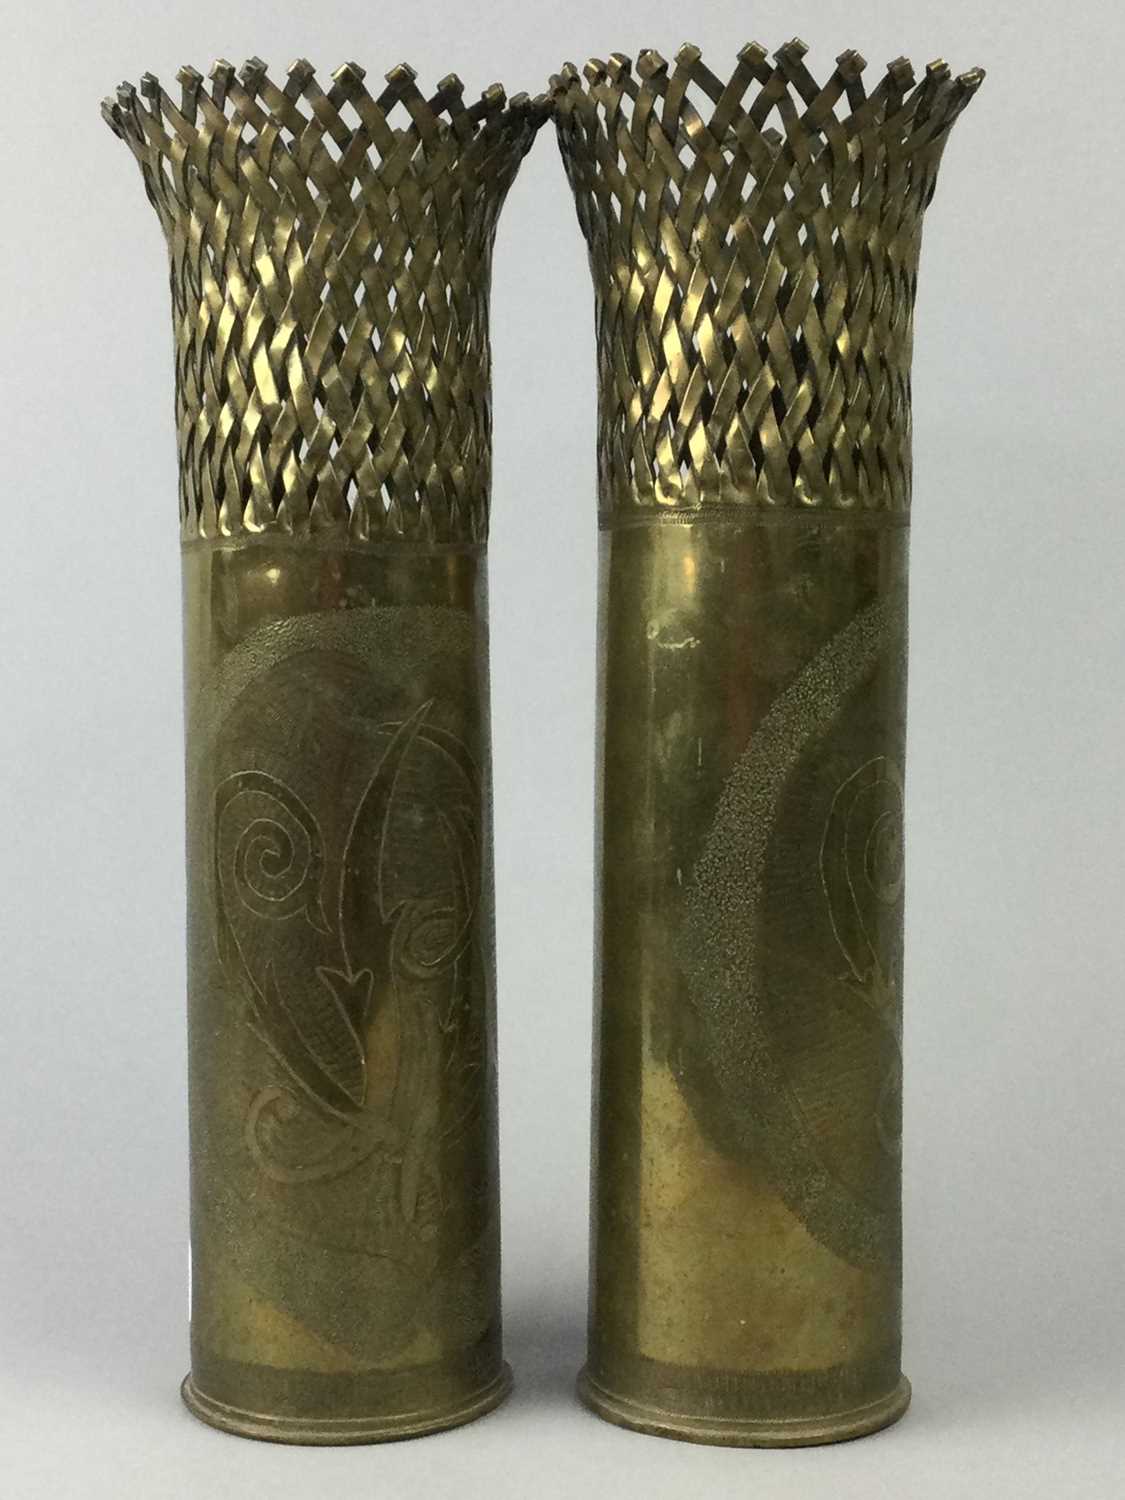 Lot 73 - A PAIR OF FRENCH WWI TRENCH ART SHELL CASES